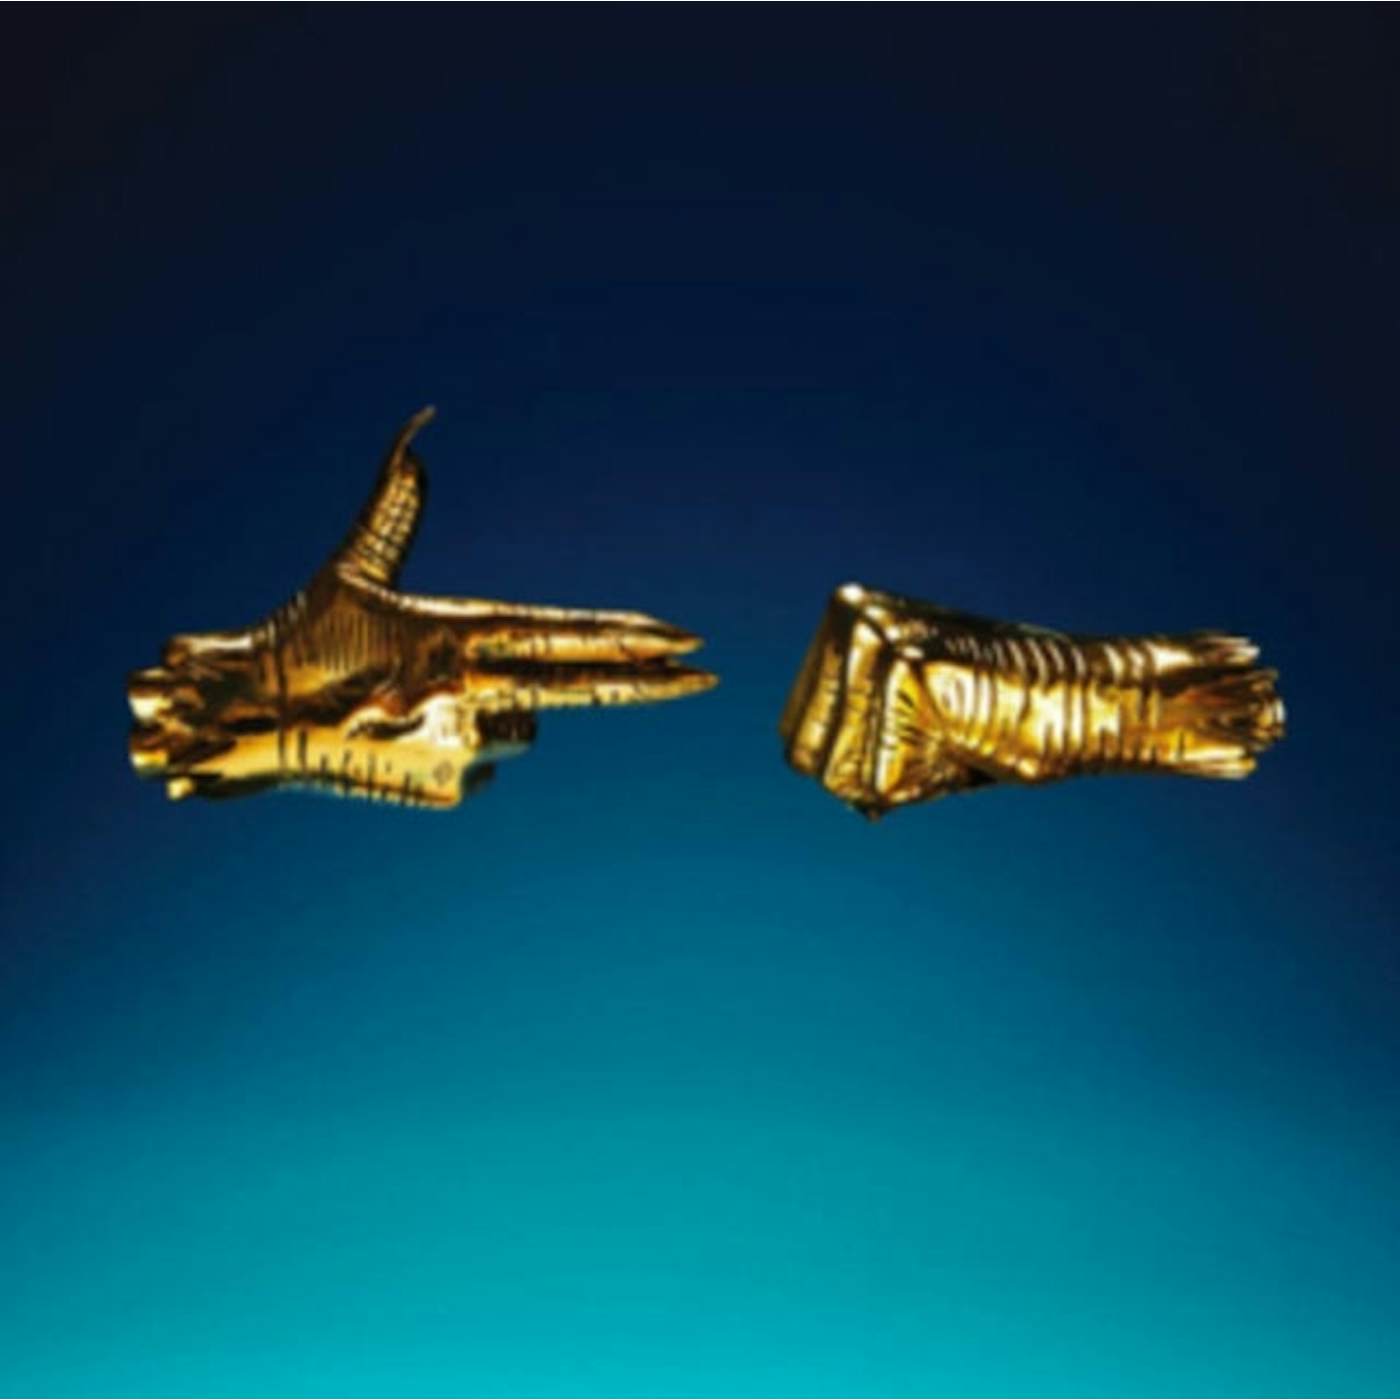 Run The Jewels LP Vinyl Record - Run The Jewels (Limited Edition) (White/Gold Vinyl)